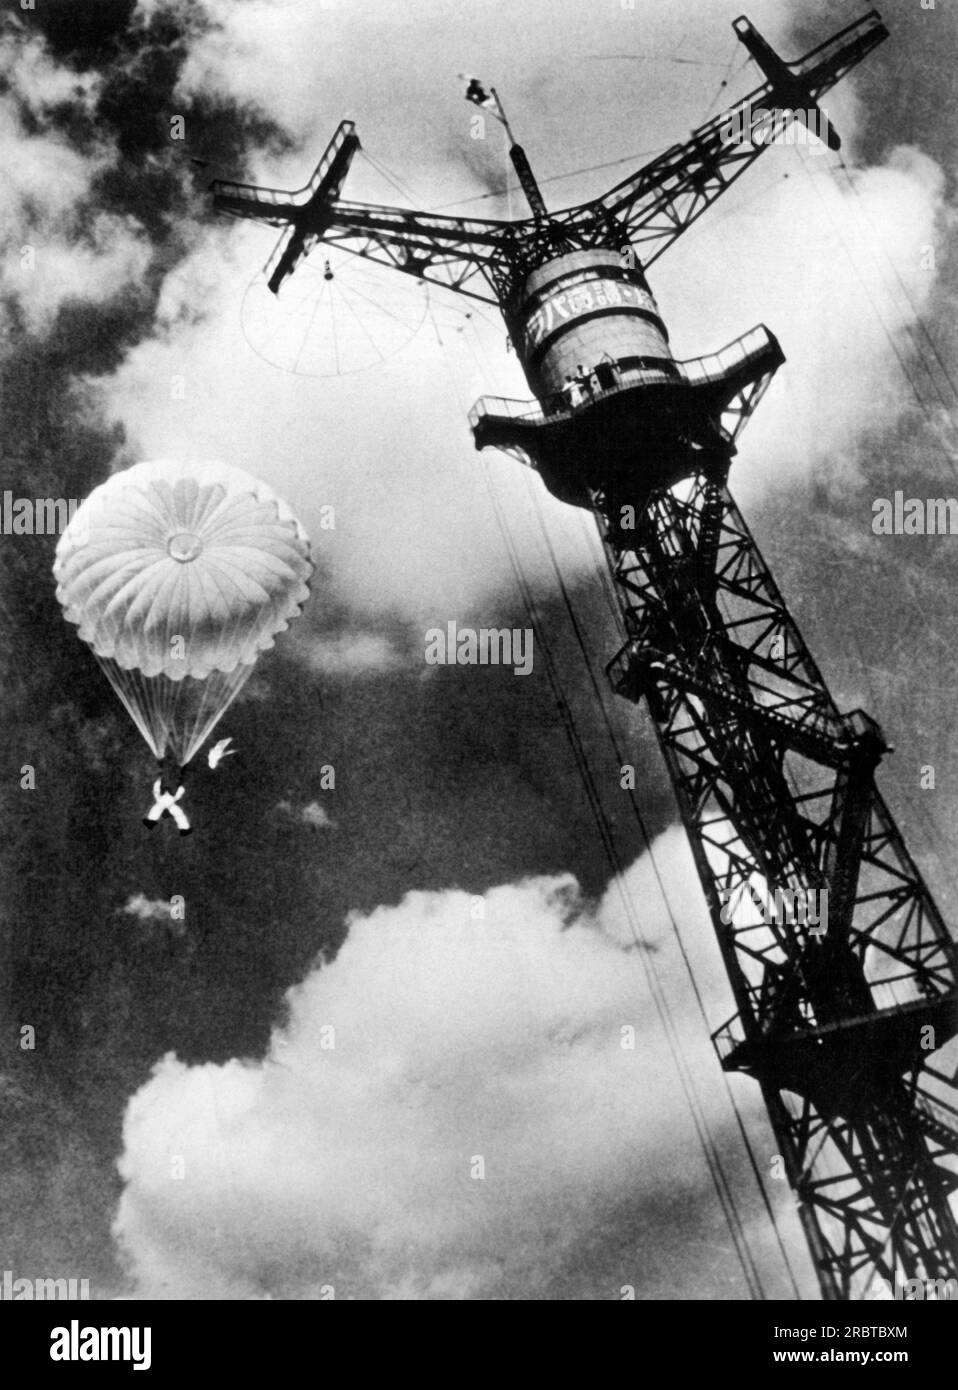 Parachute france ww2 Black and White Stock Photos & Images - Alamy